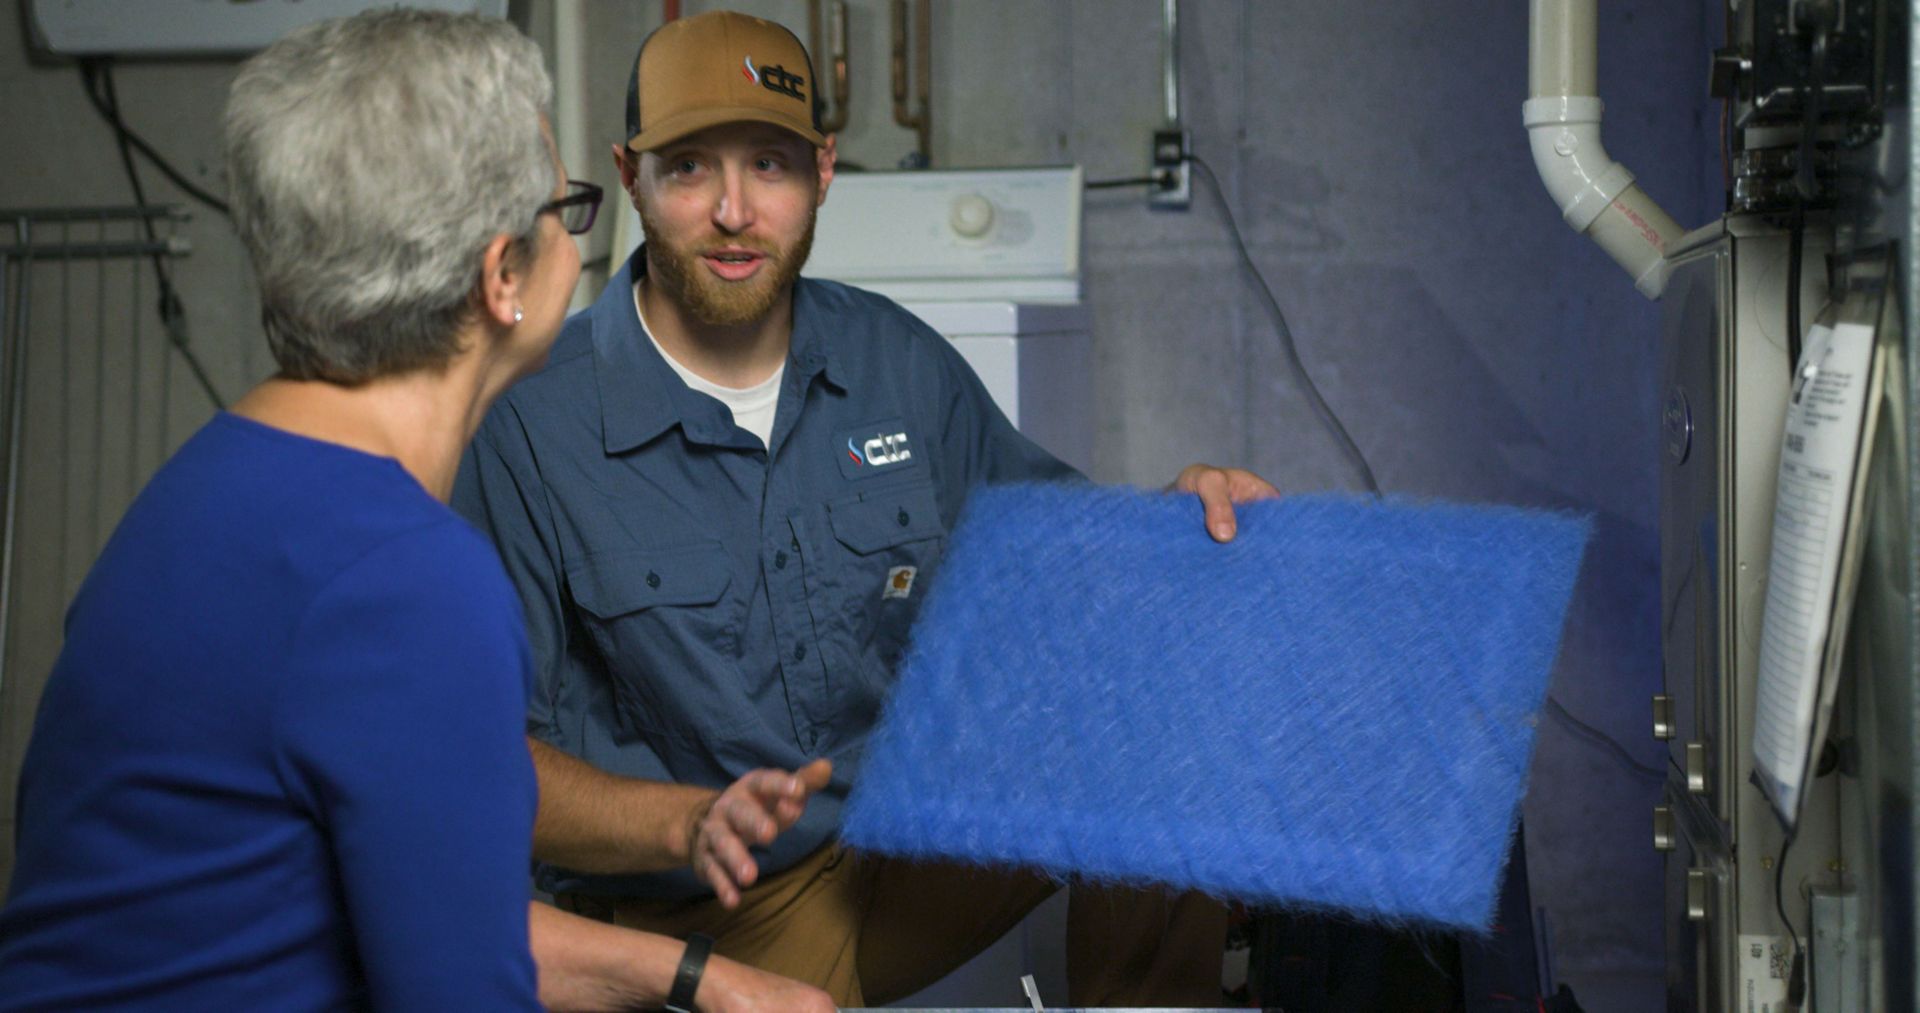 service technician explaining to a customer how to change the filter of a furnace.